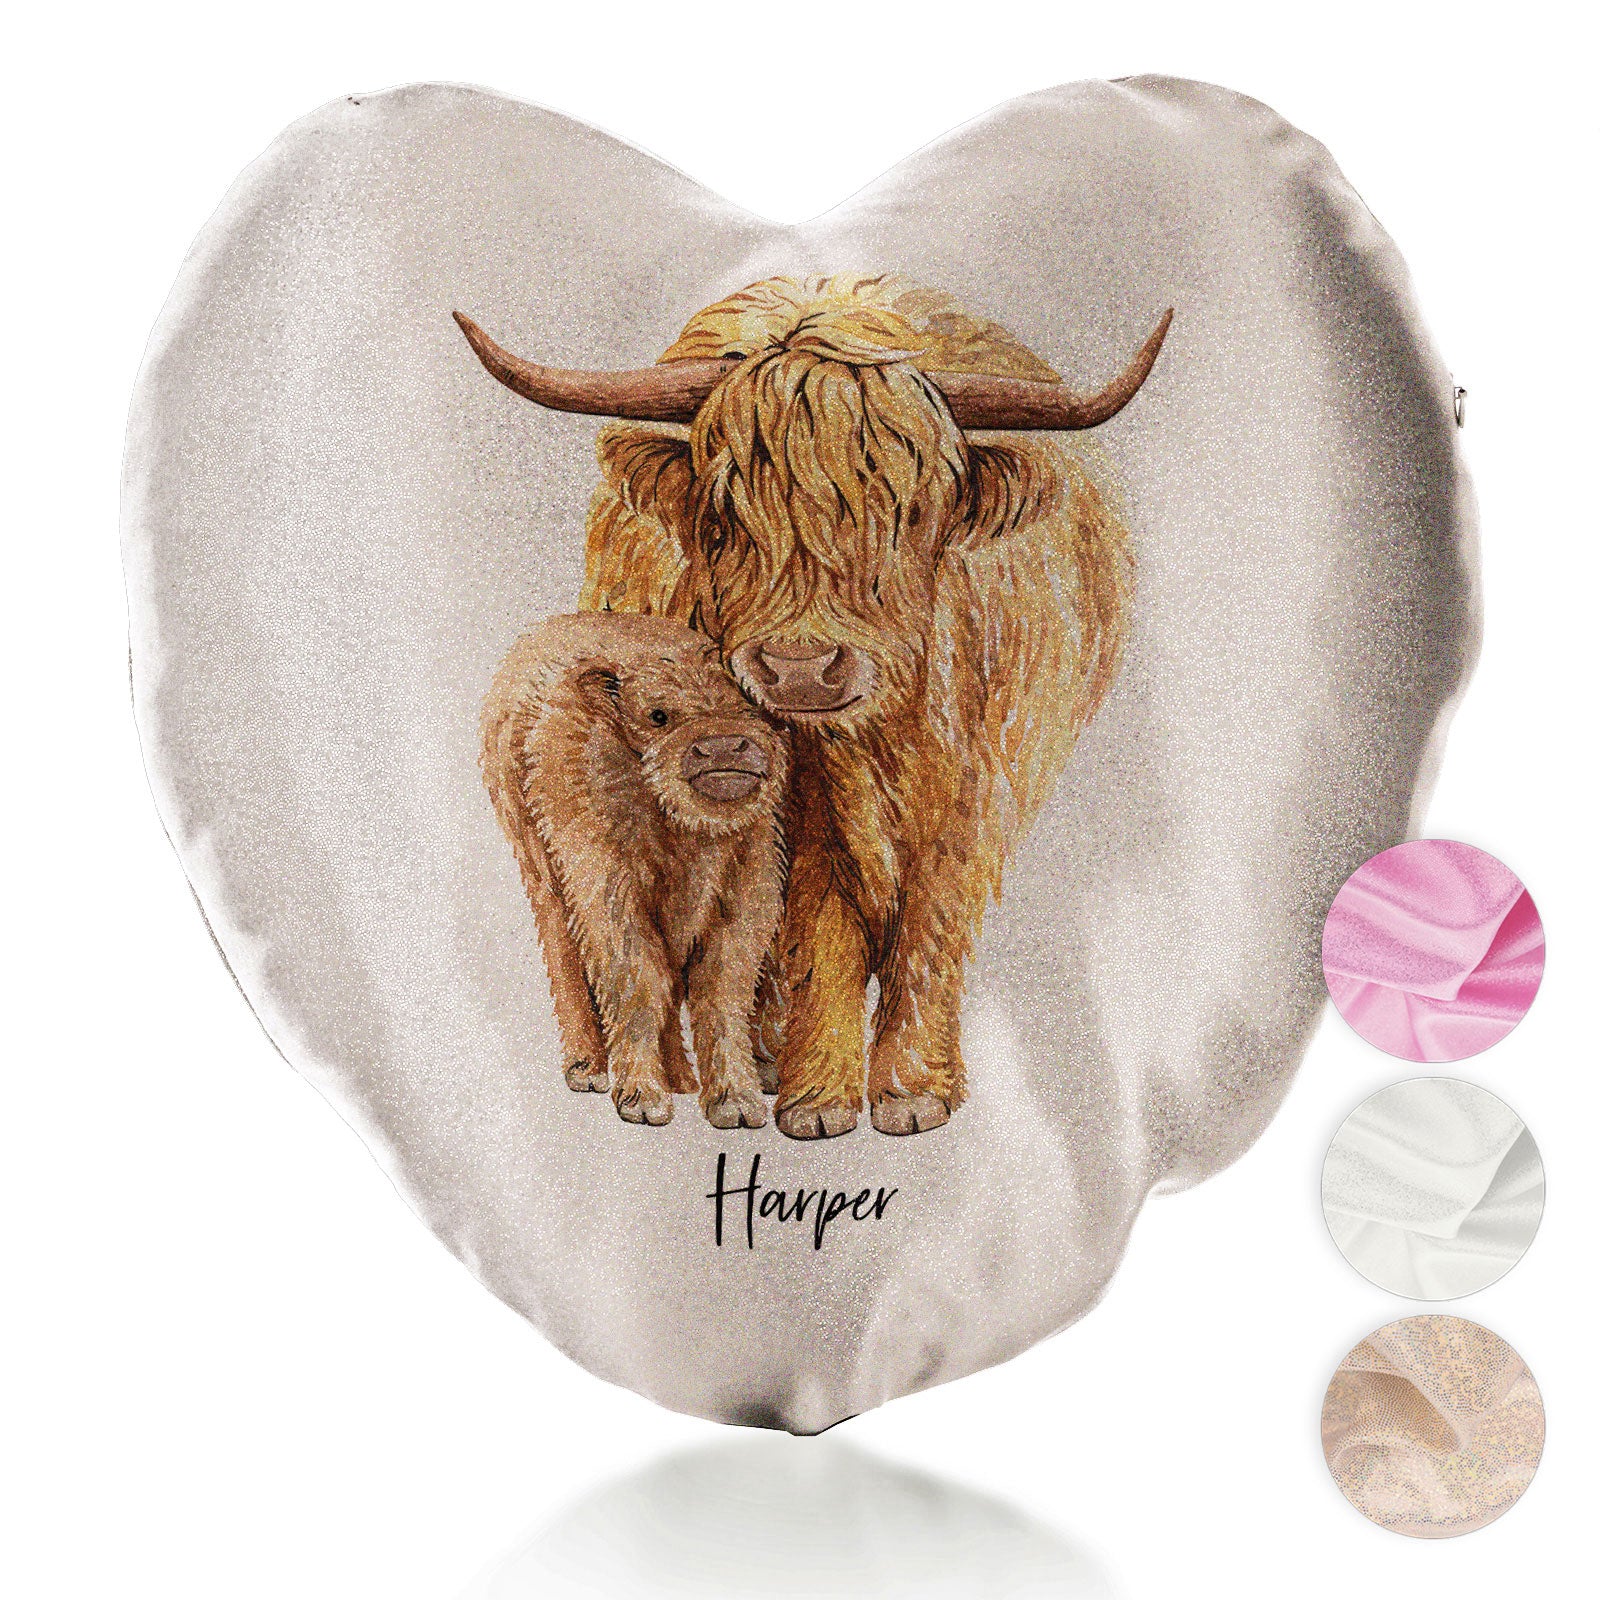 Personalised Glitter Heart Cushion with Welcoming Text and Relaxing Mum and Baby Highland Cows